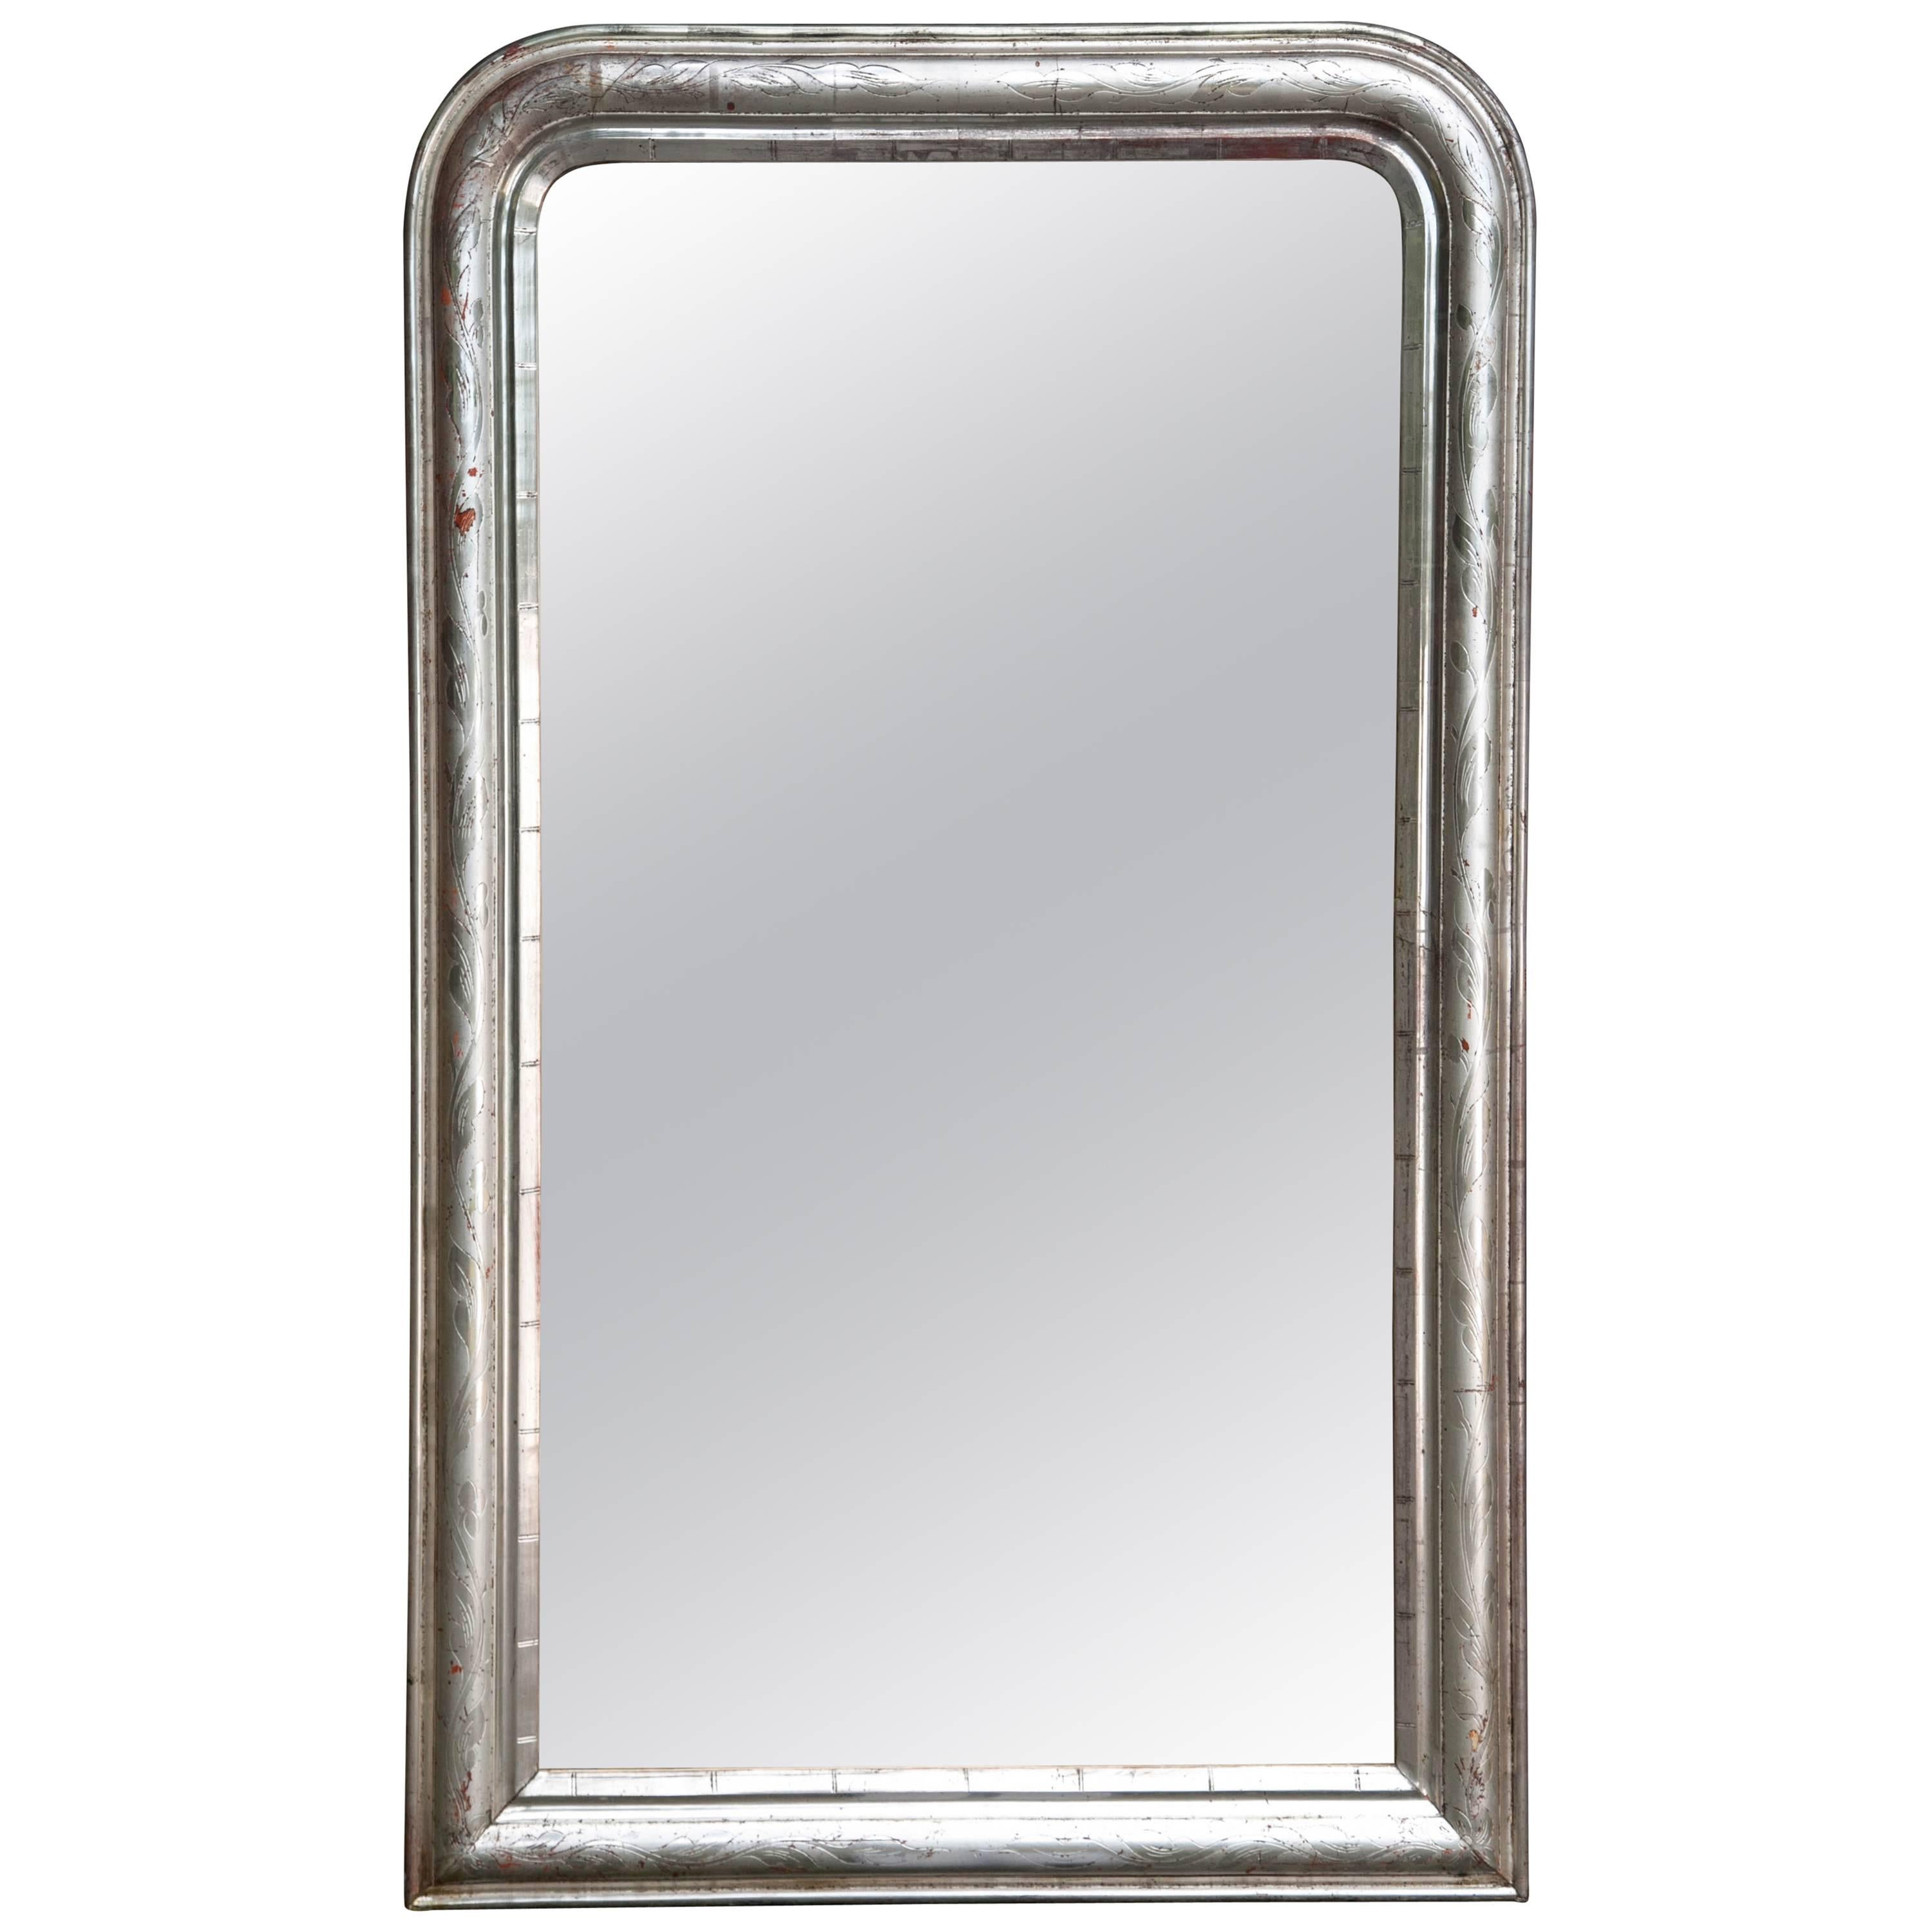 Patined Silver Leaf Mirror